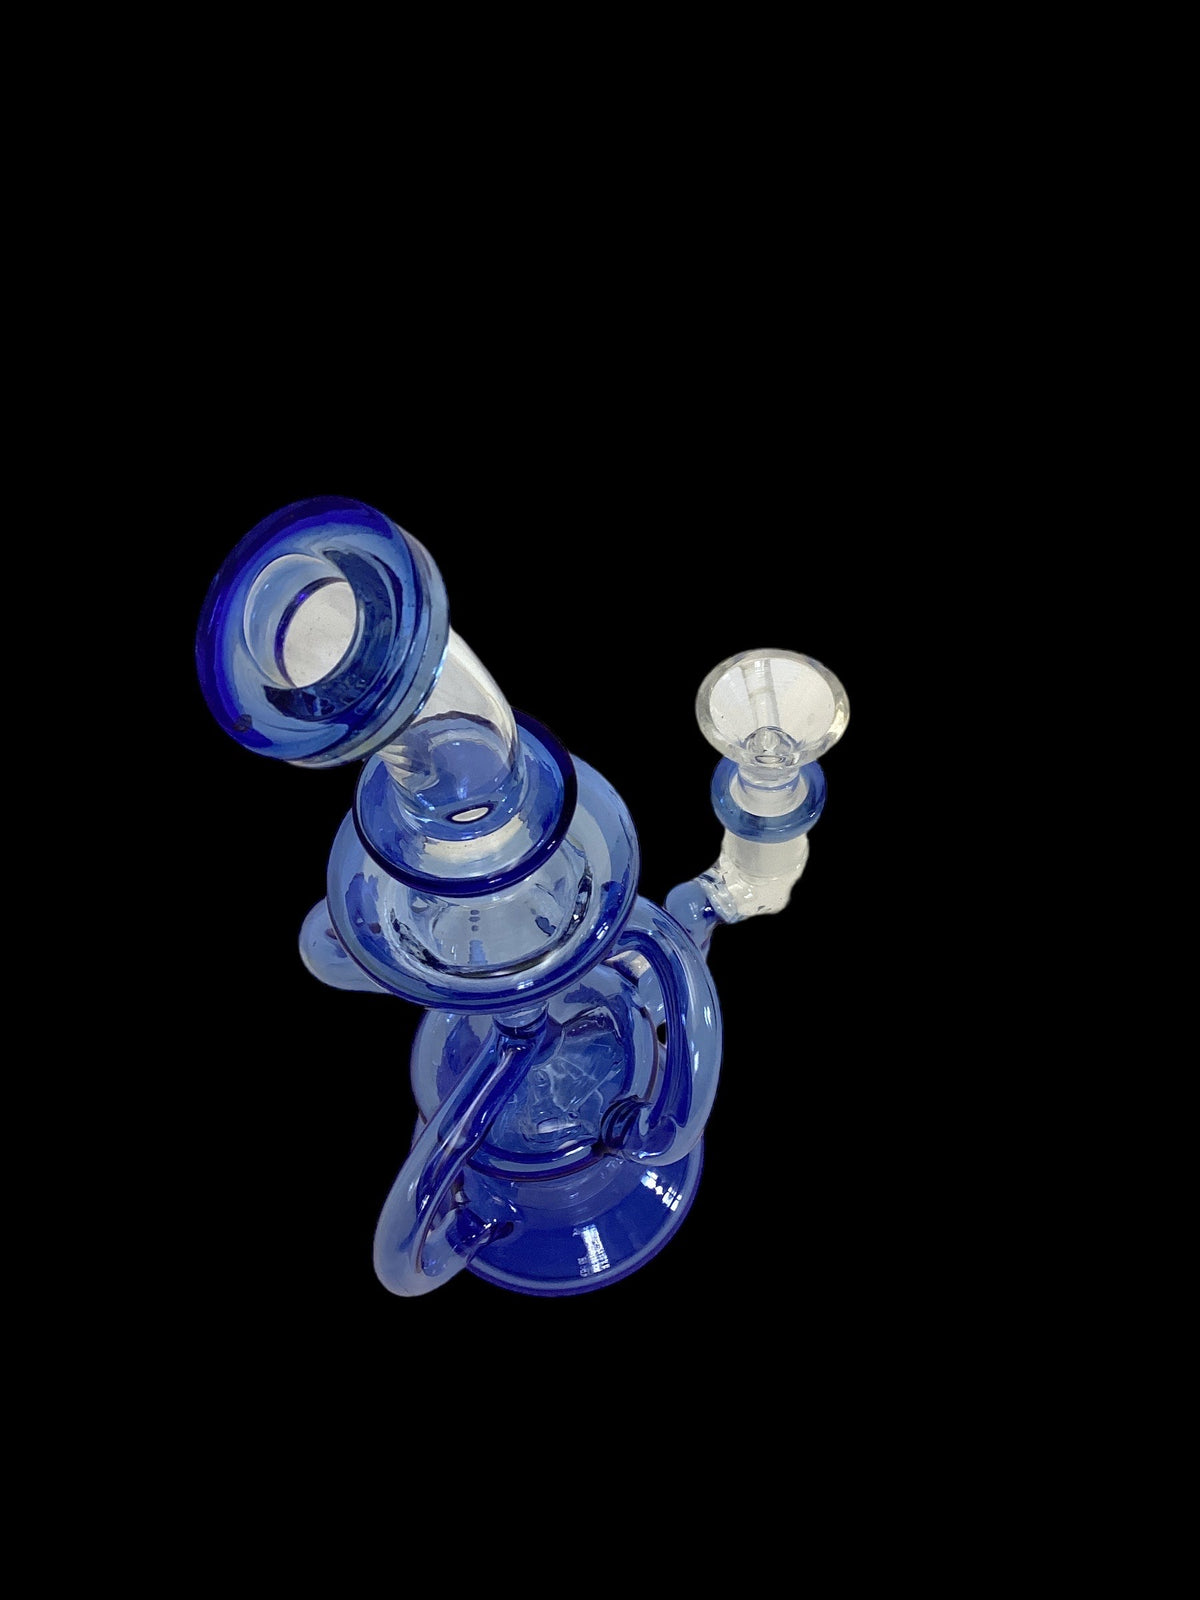 Small Recycler 14mm